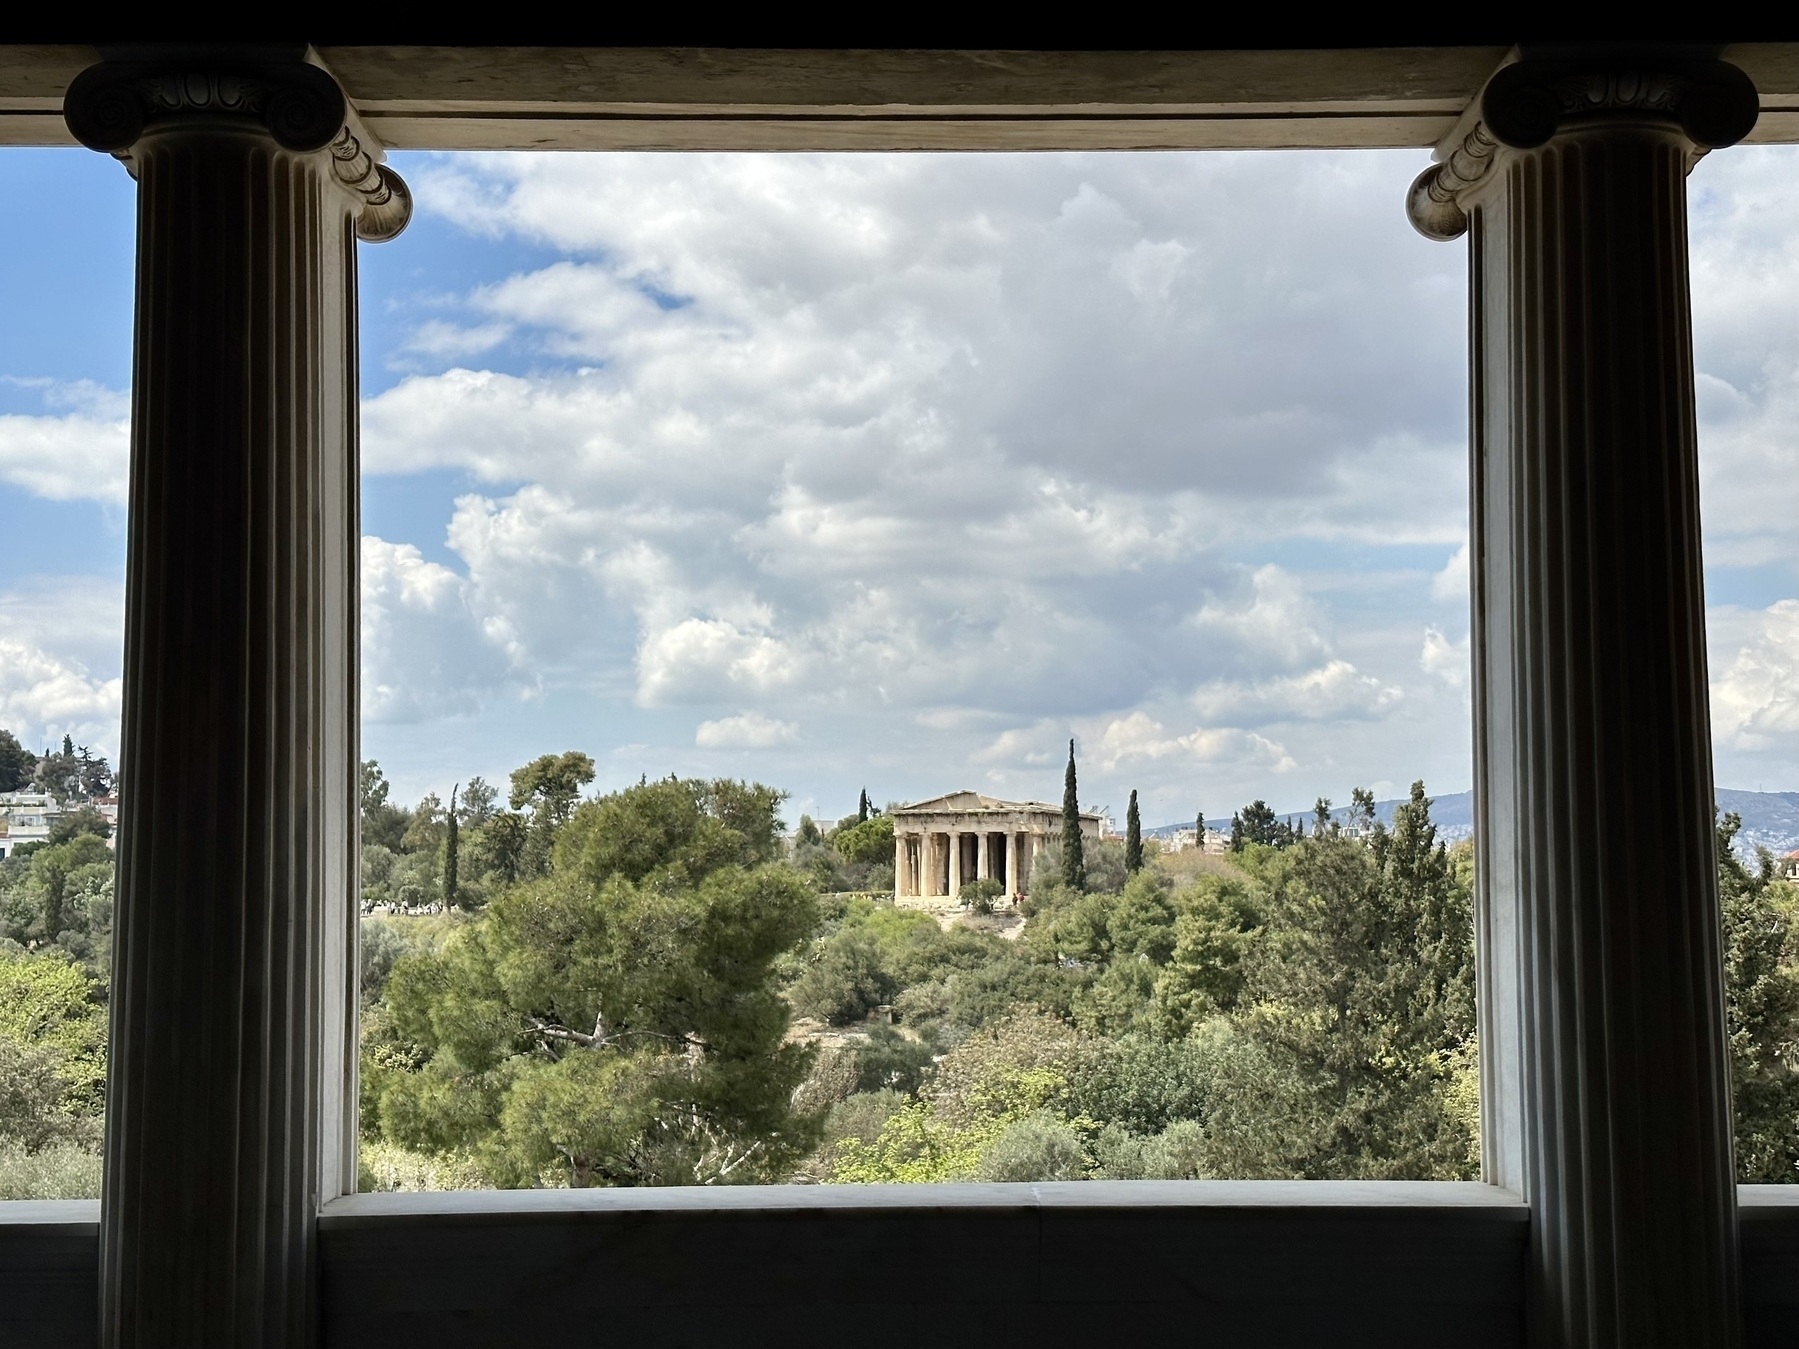 The temple of Hephaestus, viewed from the Stoa of Attalos, framed with an Ionic column on either side. The temple is in the distance on a hill, with trees in the foreground. 